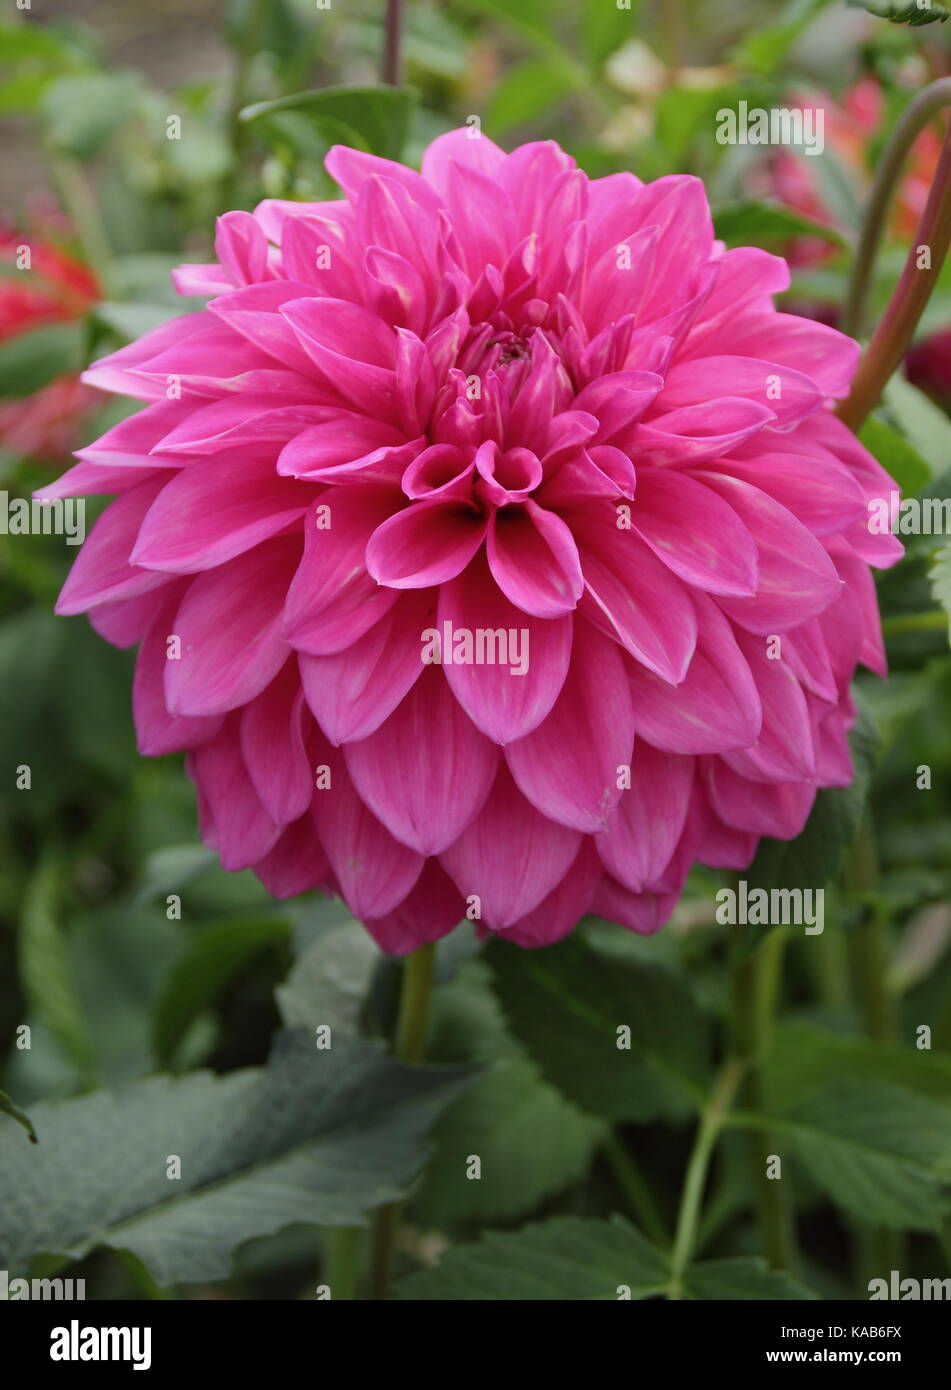 Bargaly Blush dahlia in full bloom in an English garden in late summer Stock Photo